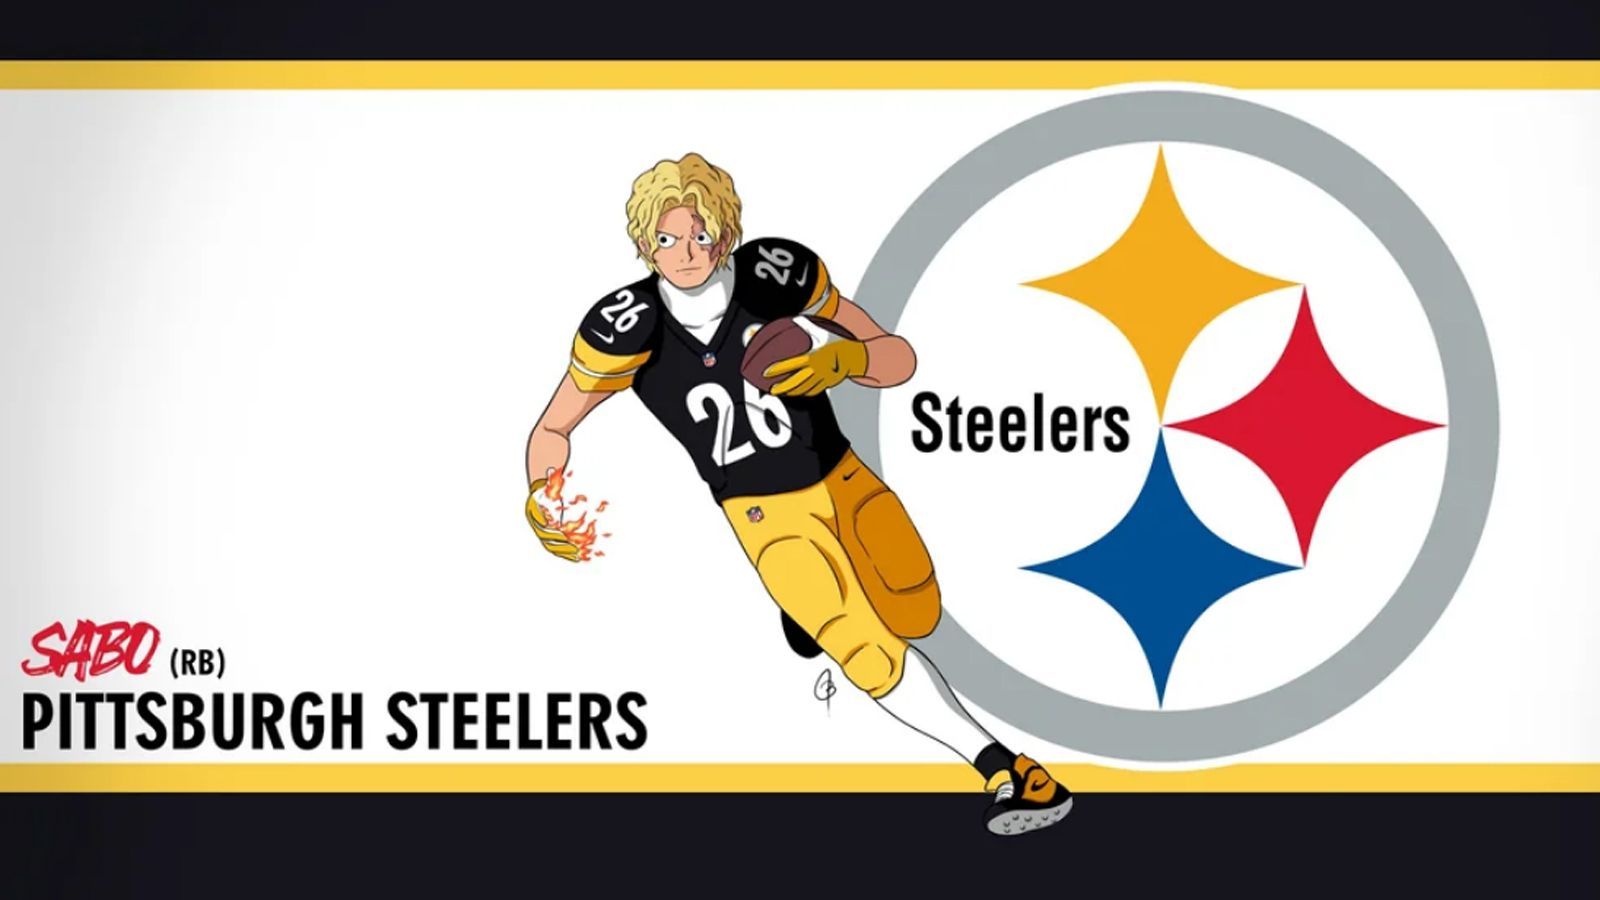 <strong>Sabo (Pittsburgh Steelers)</strong>